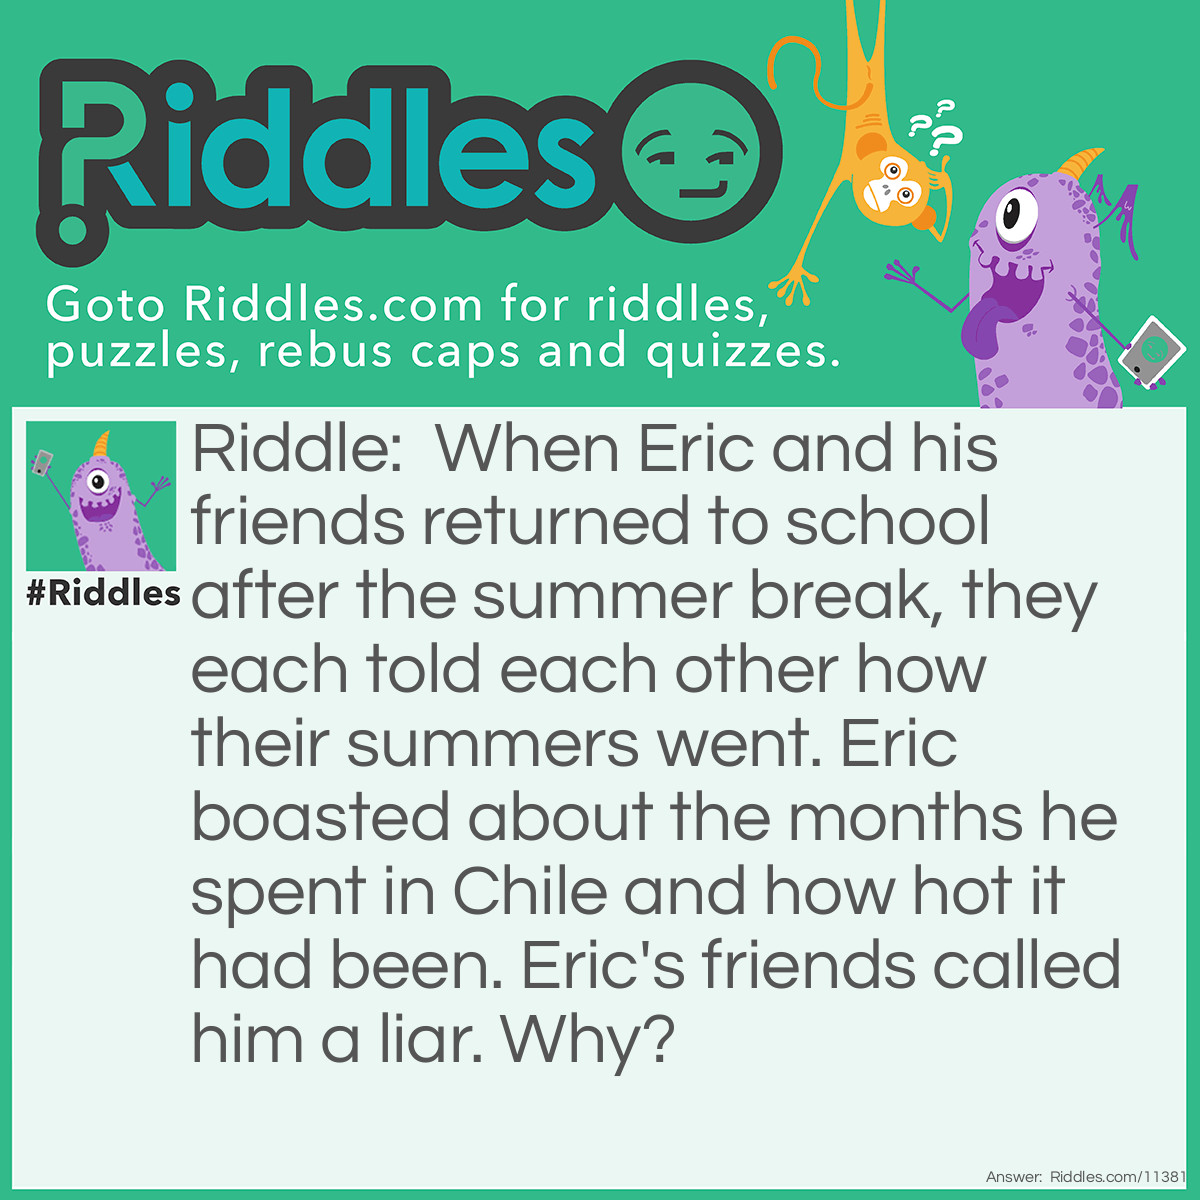 Riddle: When Eric and his friends returned to school after the summer break, they each told each other how their summers went. Eric boasted about the months he spent in Chile and how hot it had been. Eric's friends called him a liar. Why? Answer: Assuming that these friends live in the United States, if it's summer in the U.S (which is in North America), it's winter in Chile because Chile is in South America. It can't possibly be hot during the winter. Therefore, Eric lied about being in Chile.